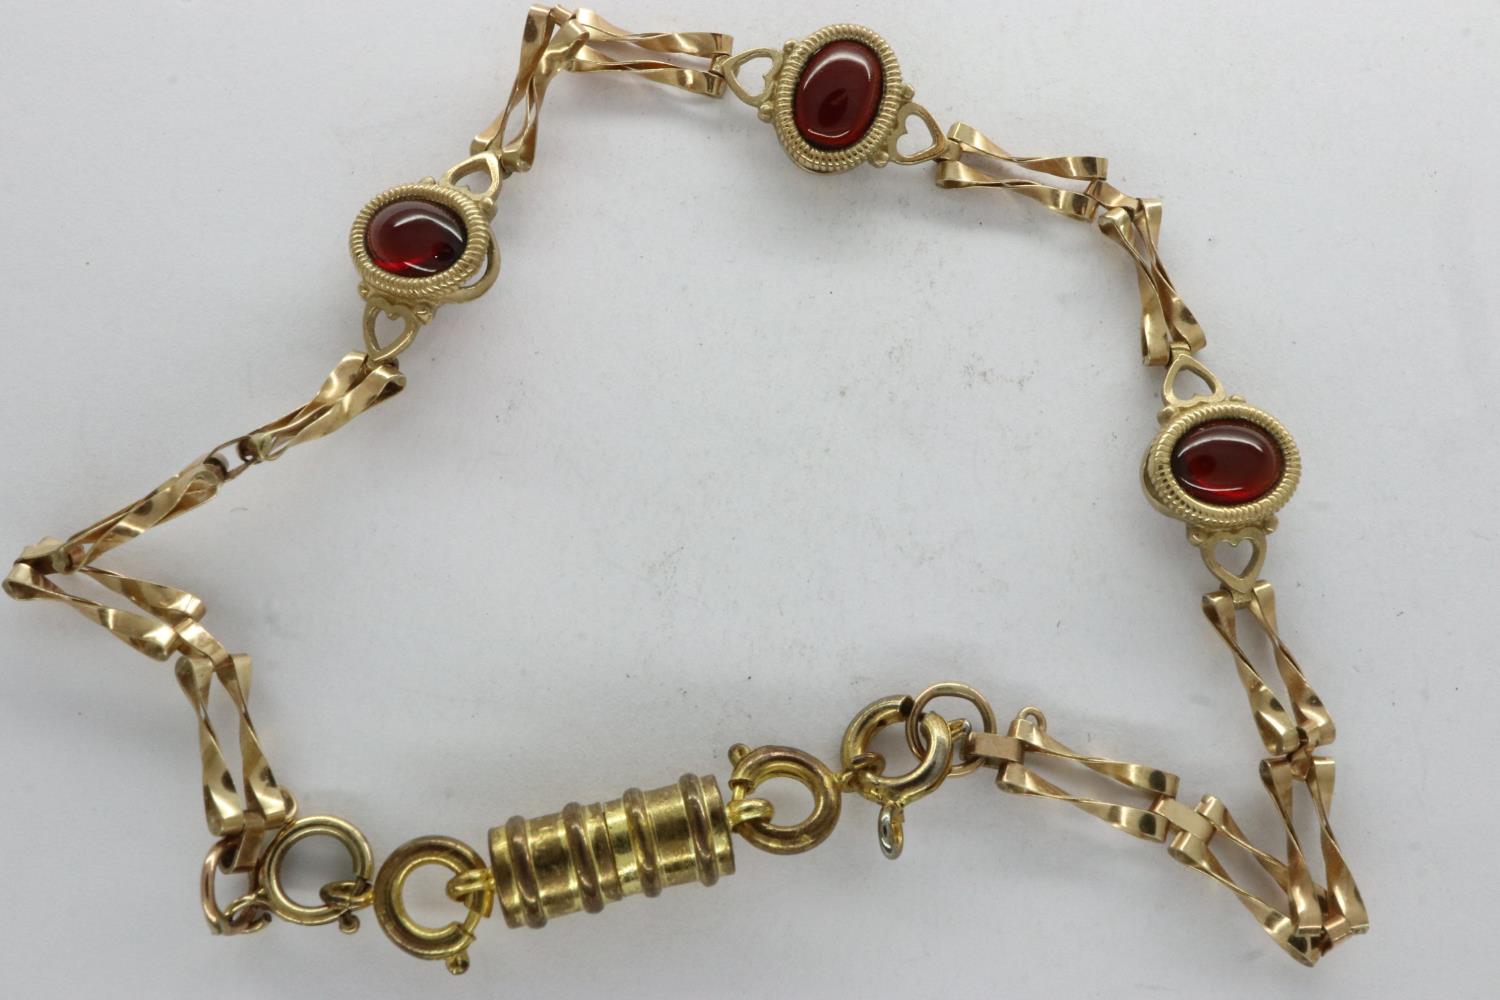 9ct gold gate bracelet with magnetic clasp set with three cherry amber cabochons, L: 20 cm, 6.1g. UK